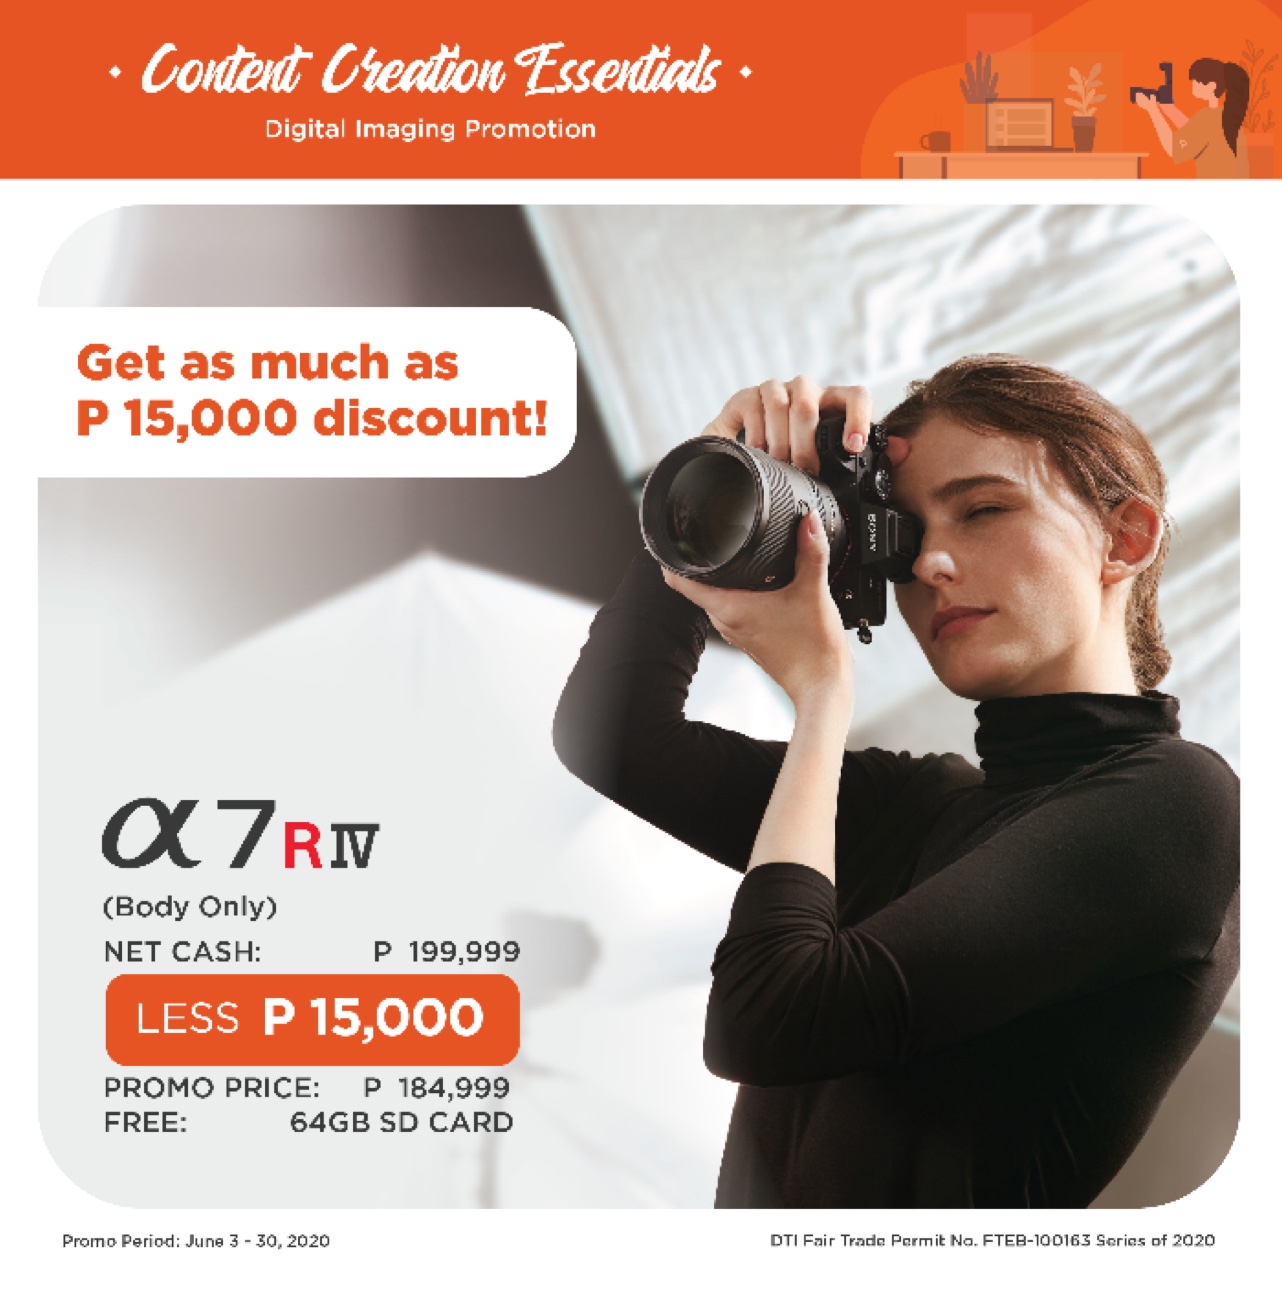 Sony Content Creation essentials promo offers savings up to PHP15,000